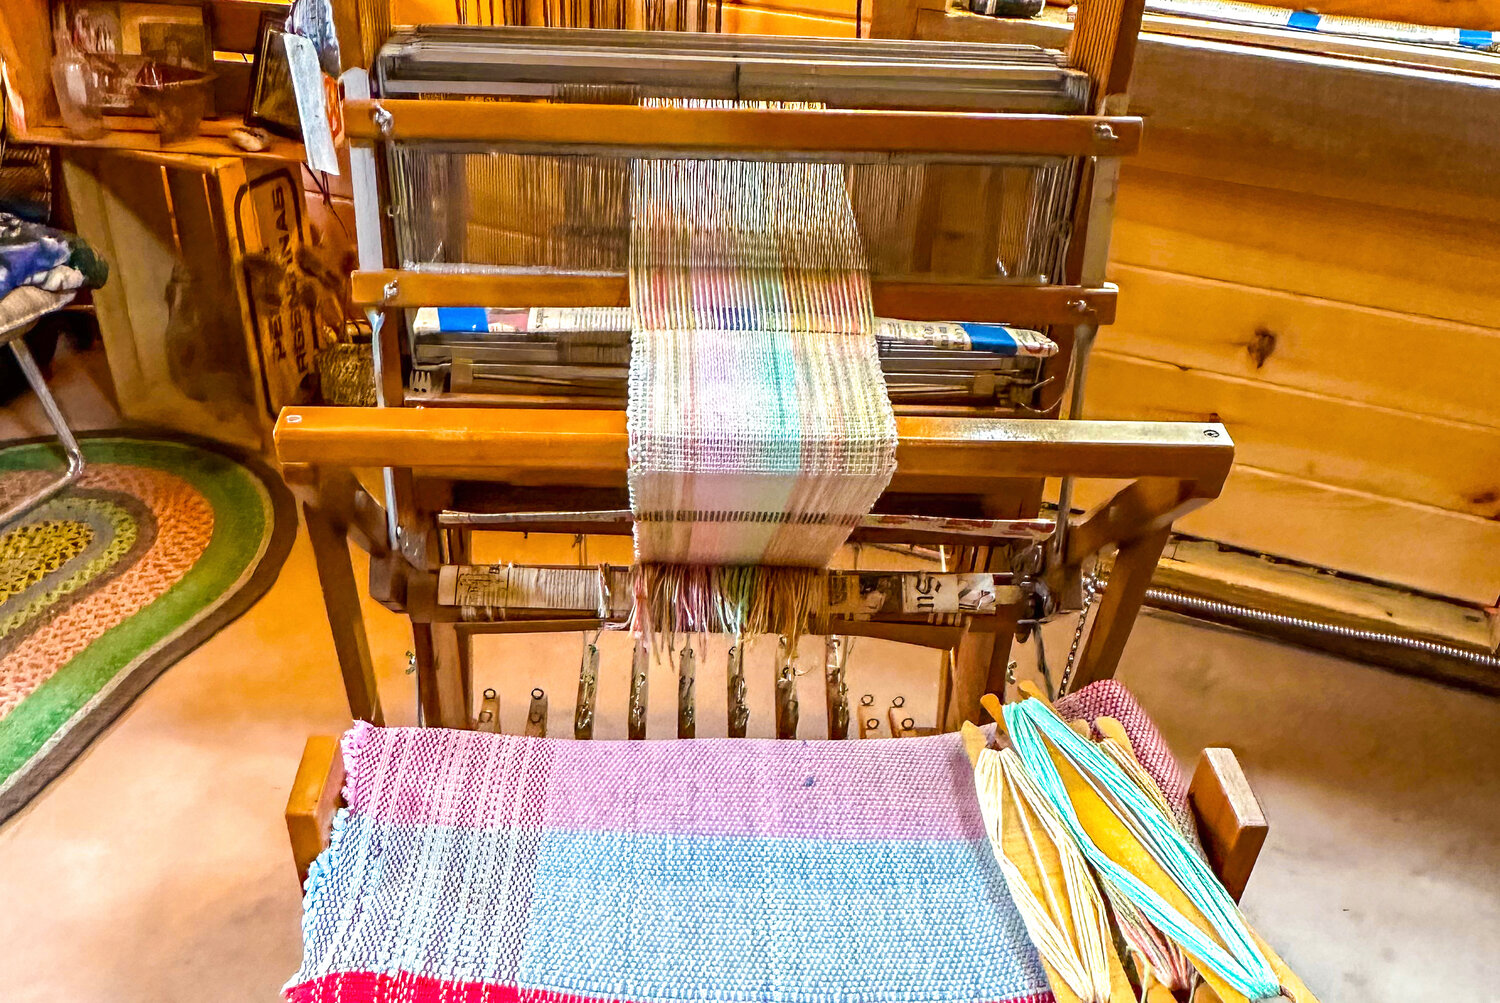 Hoffman explores color combinations at the weaving loom